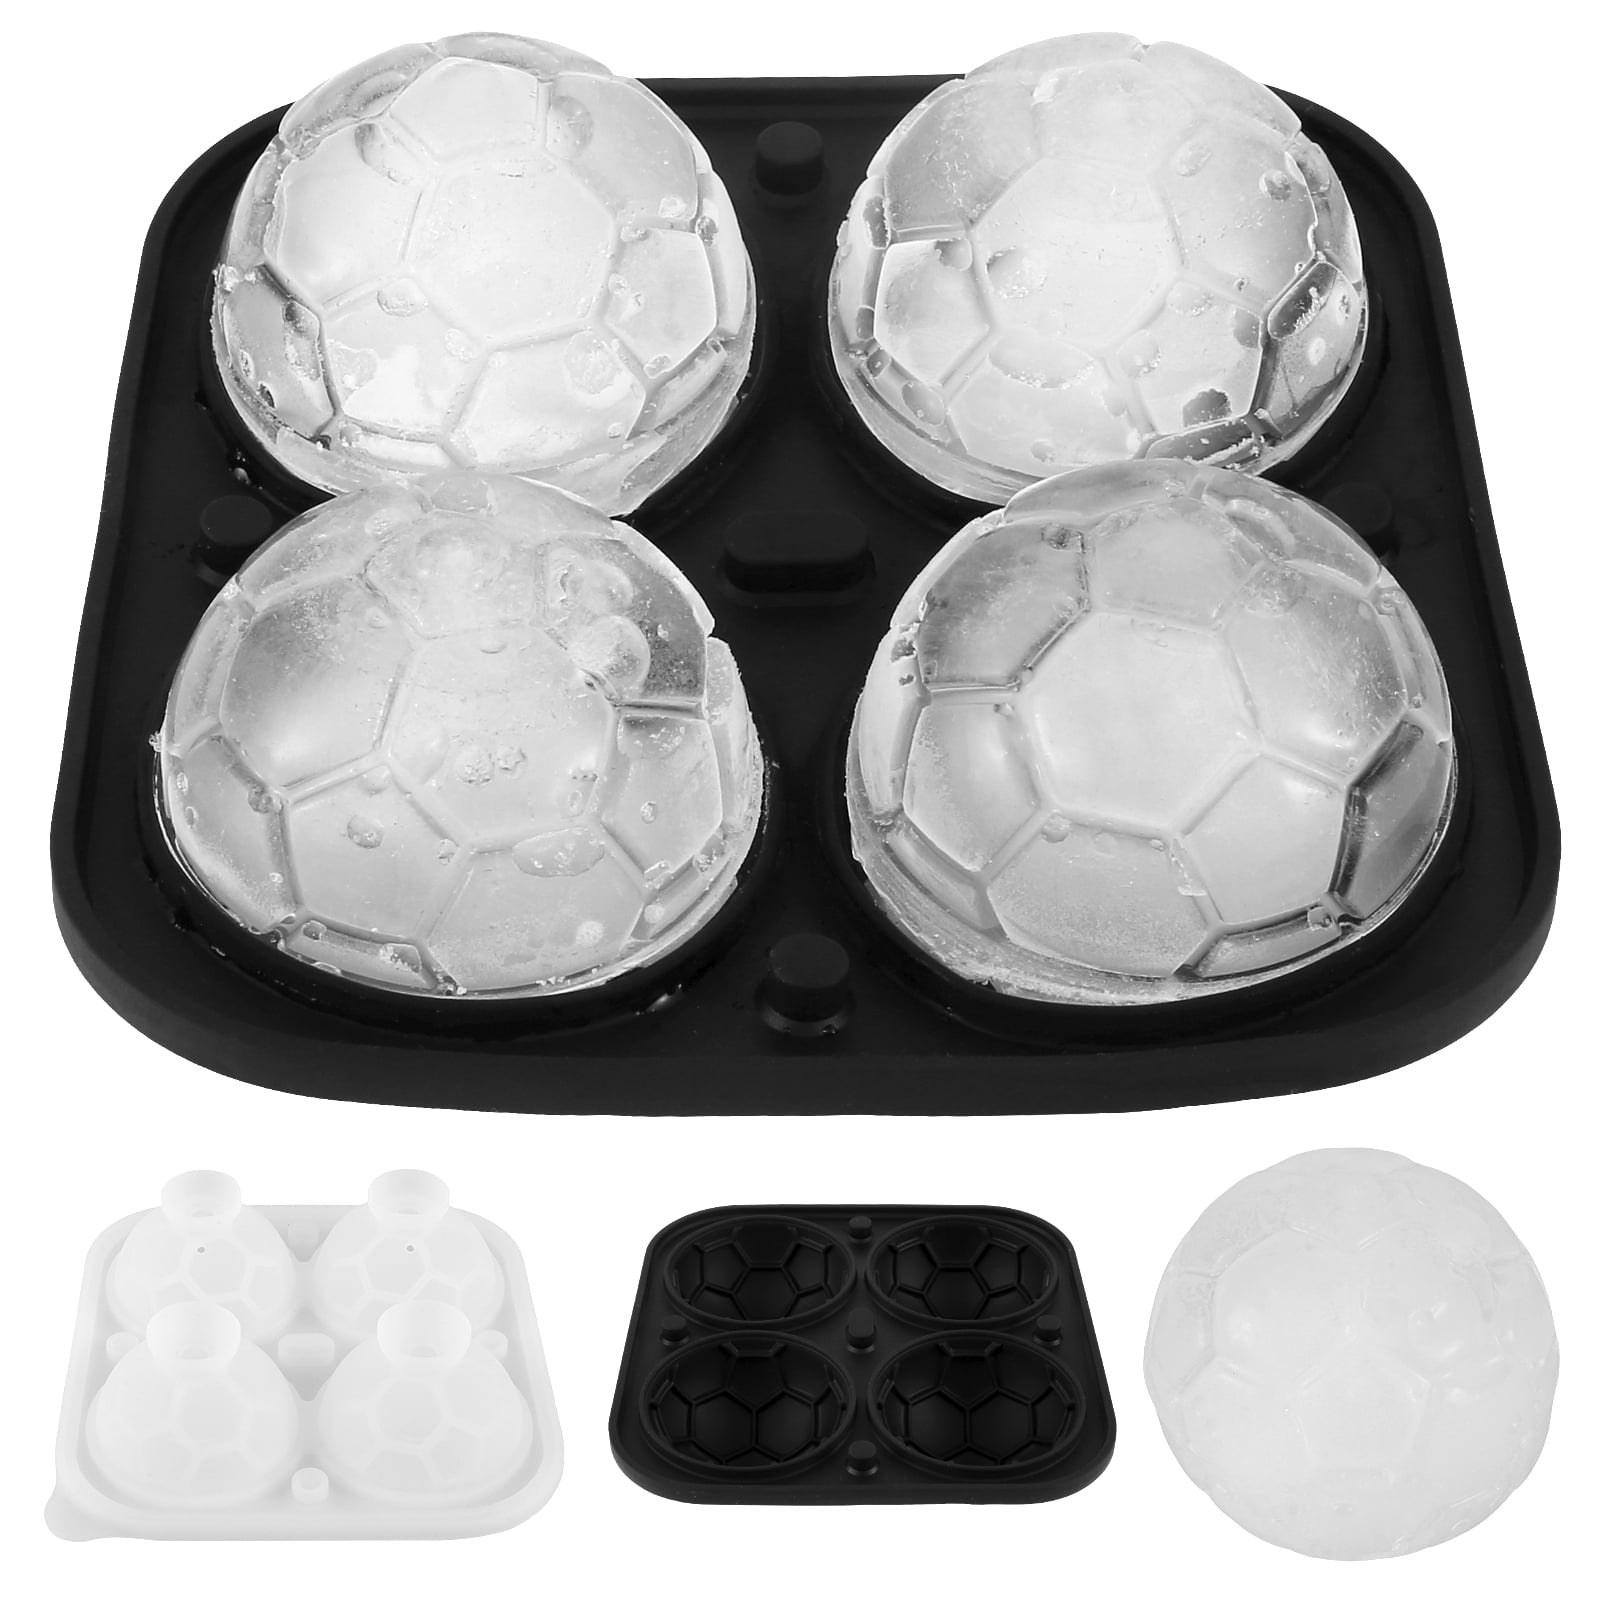 FOSOE Golf Ball Shaped Ice Cube Tray, Large Ball Shapes Ice Trays, Sphere  Ice Molds, Round Ice Ball Maker Molds for Whiskey, Cocktails, Bourbon,  Sport